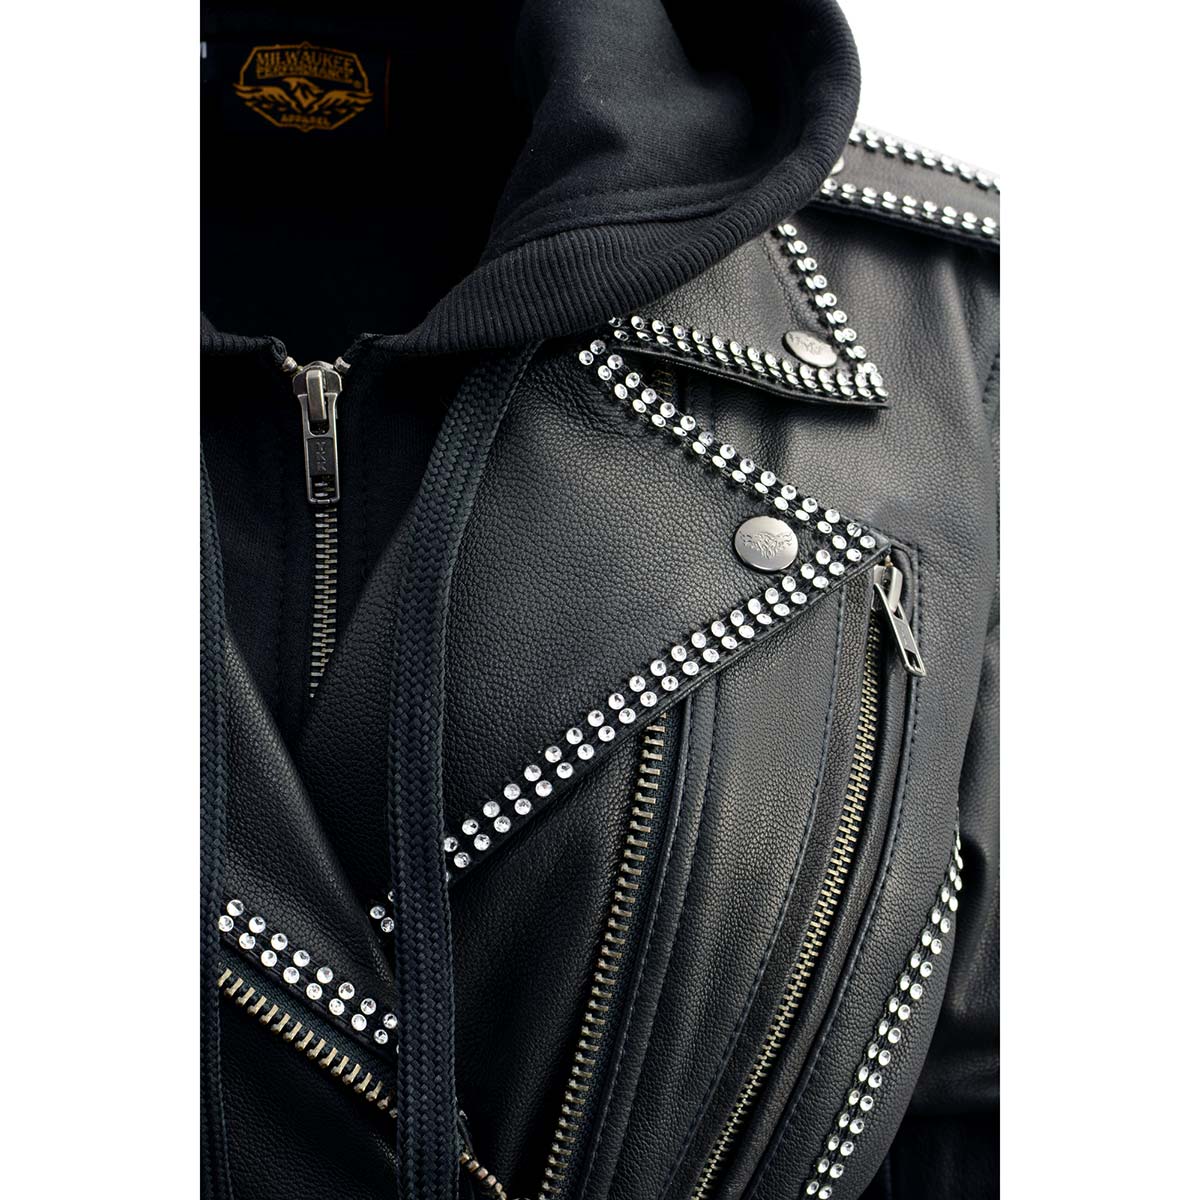 Women's Black 'Bedazzled' Leather Moto Jacket with Hoodie